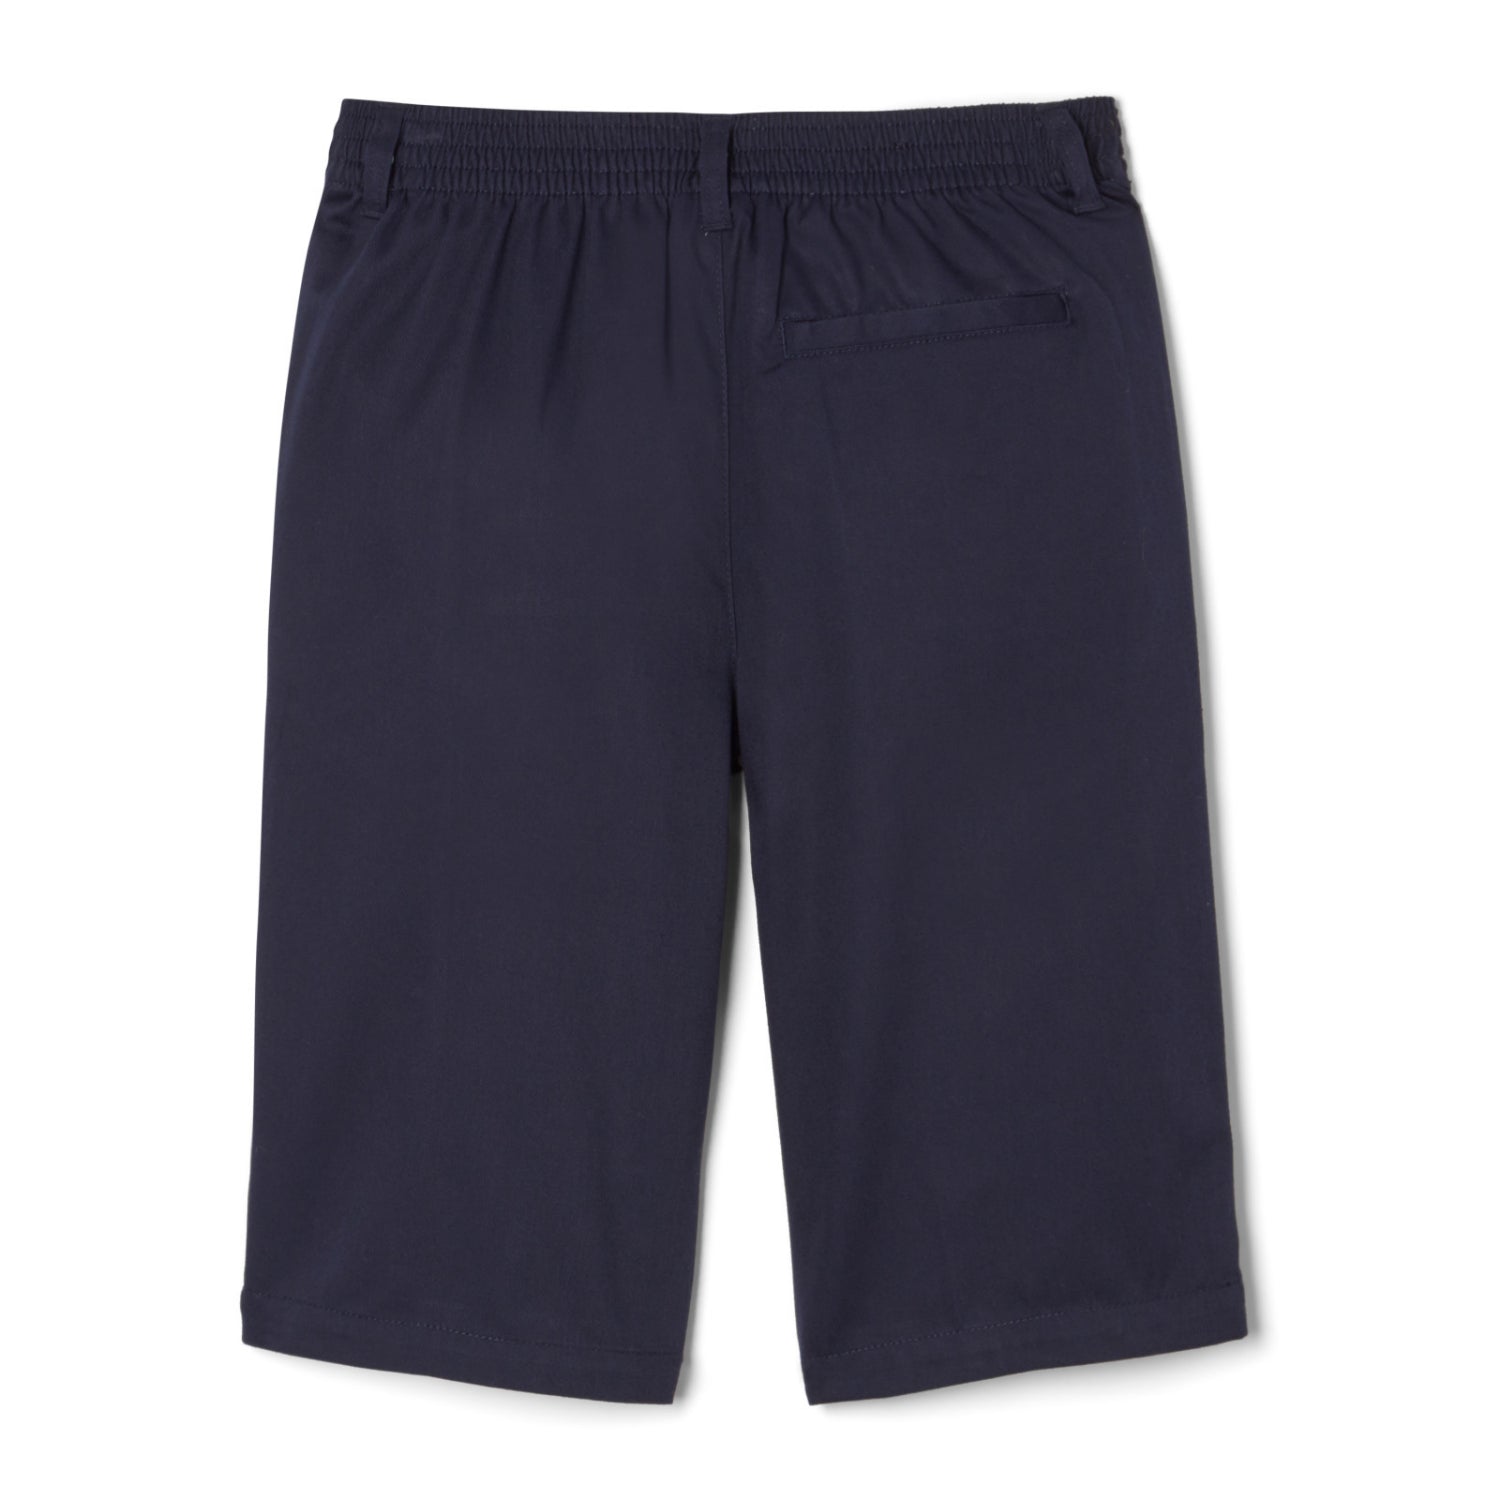 French Toast Boys 4-20 Pull-On Twill Shorts